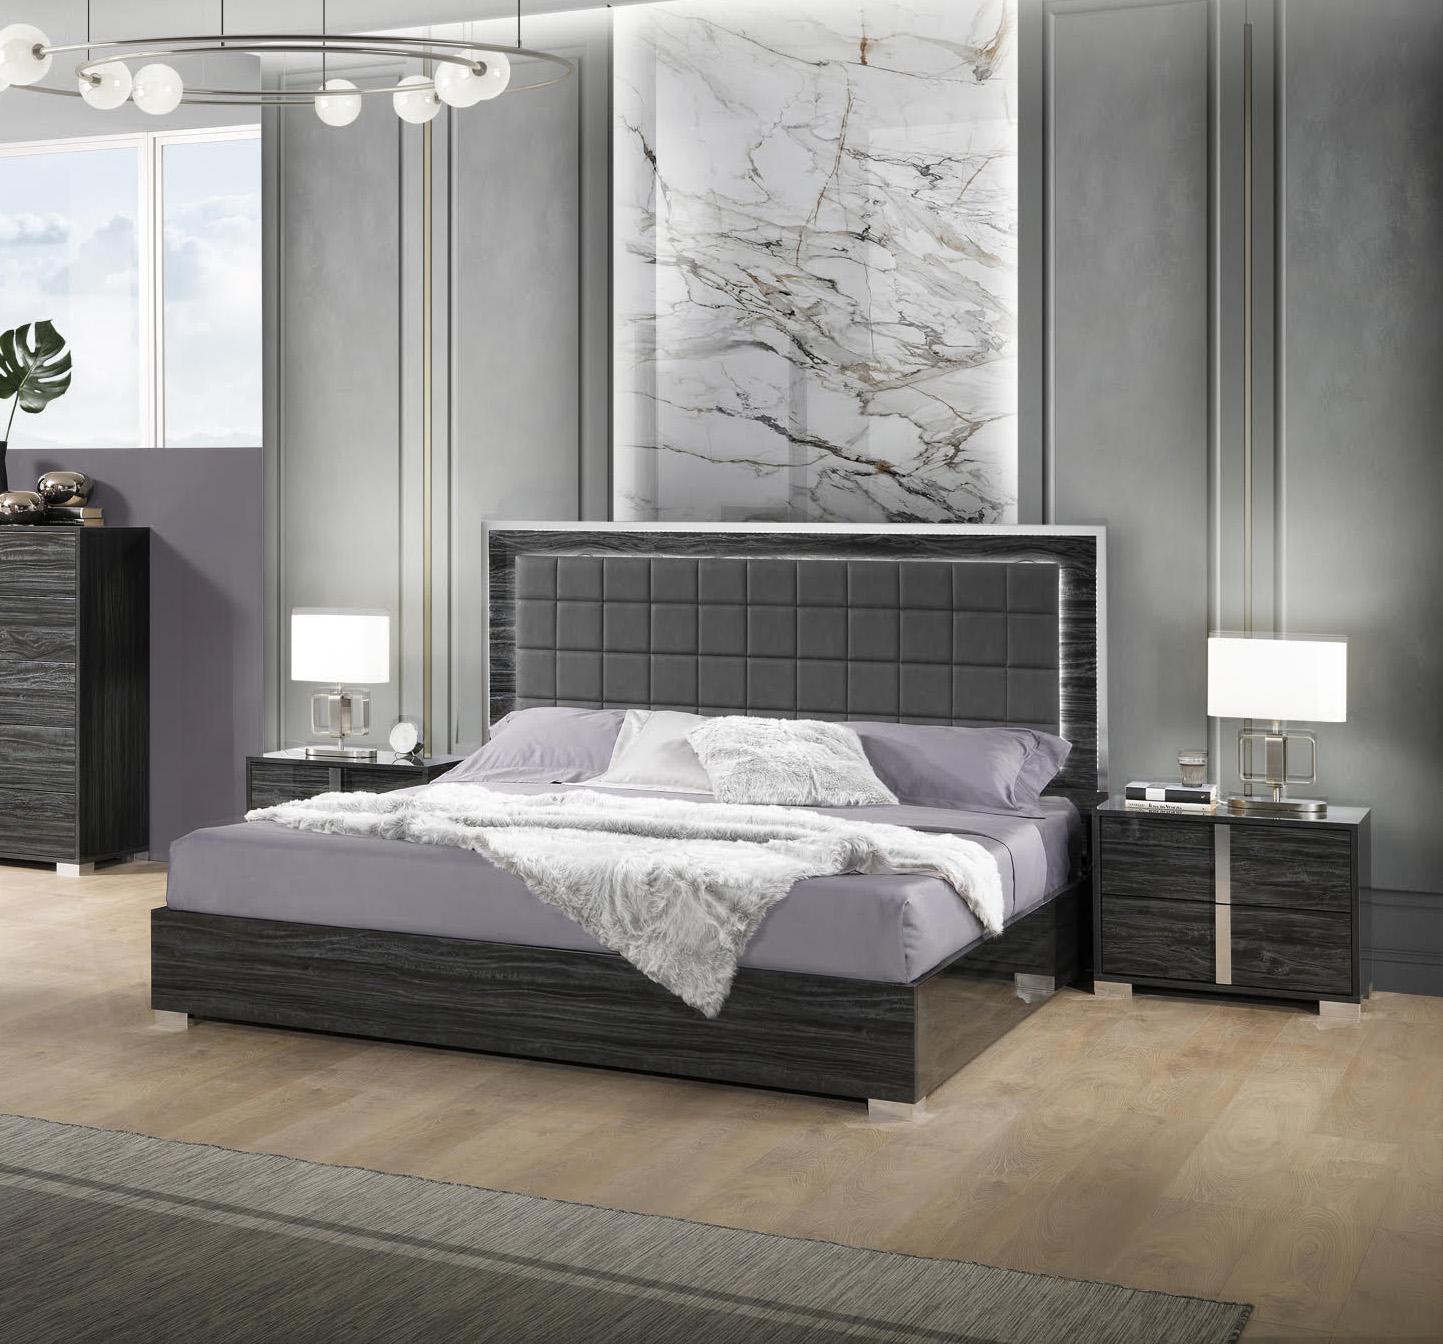 

    
Contemporary King Size Bedroom Set 3Pcs in Gloss Grey MADE IN ITALY J&M Alice
